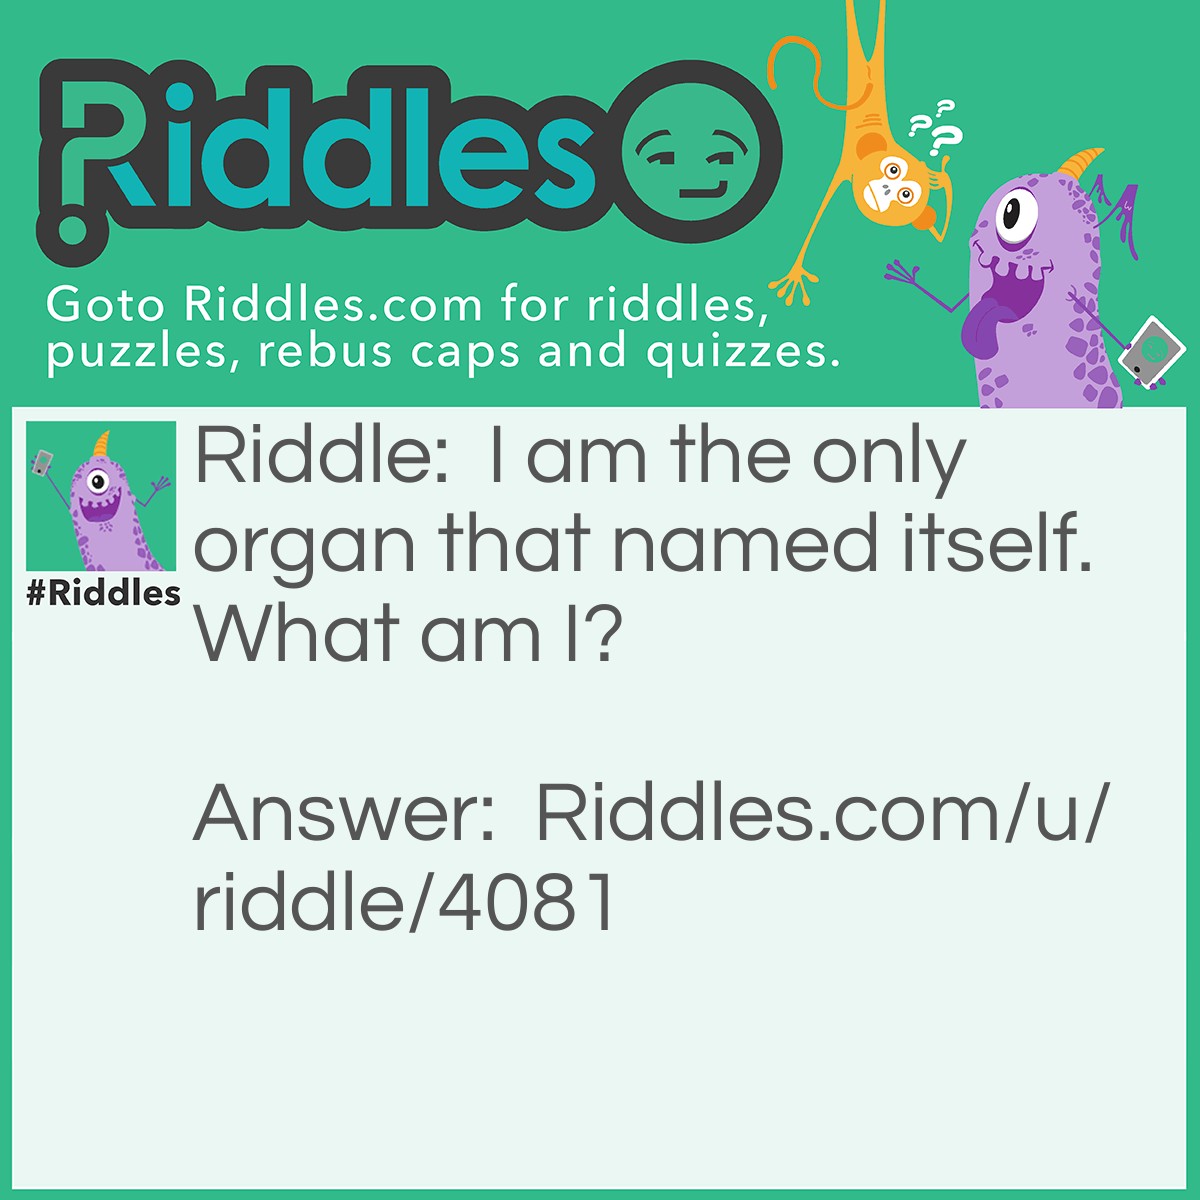 Riddle: I am the only organ that named itself. What am I? Answer: The brain.